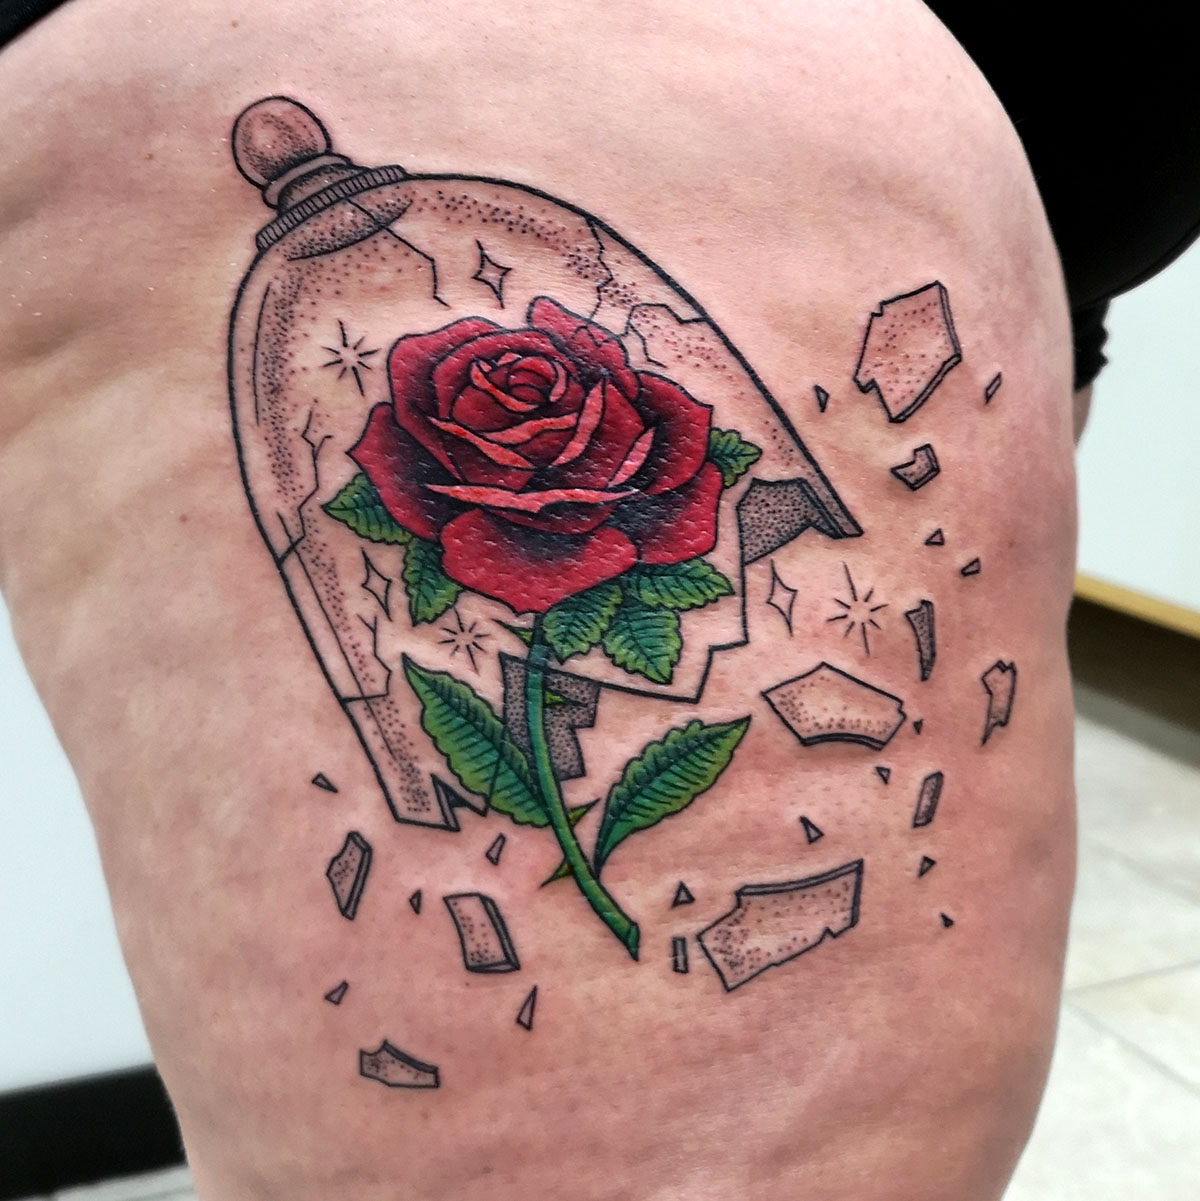 Beauty and the beast rose by MythosTattoo on DeviantArt